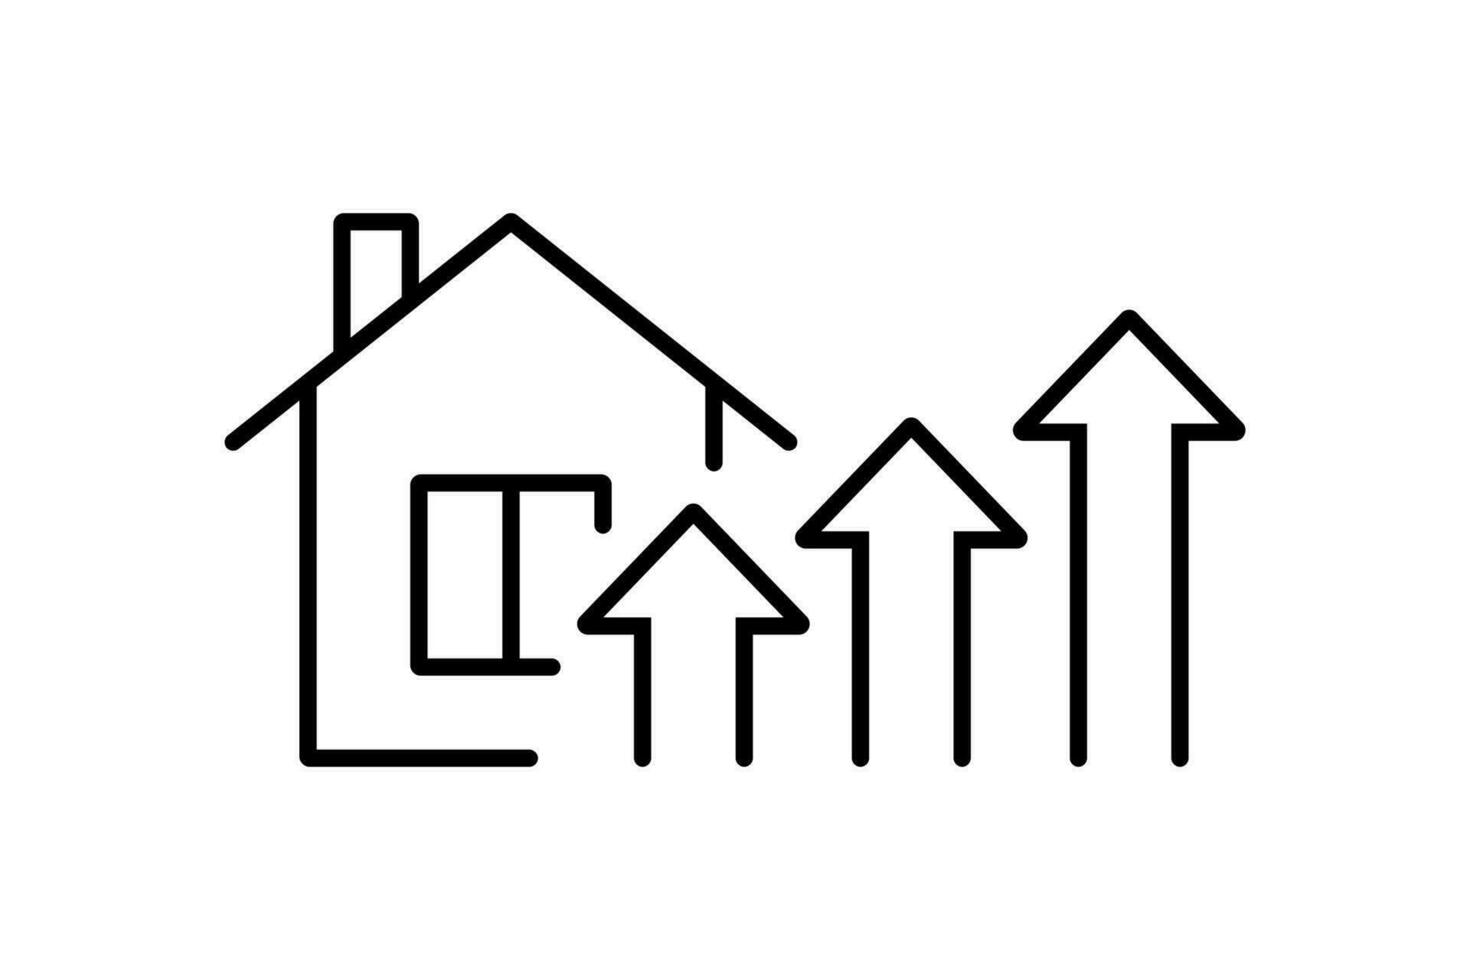 House investment growth icon. Editable stroke. Vector illustration design.